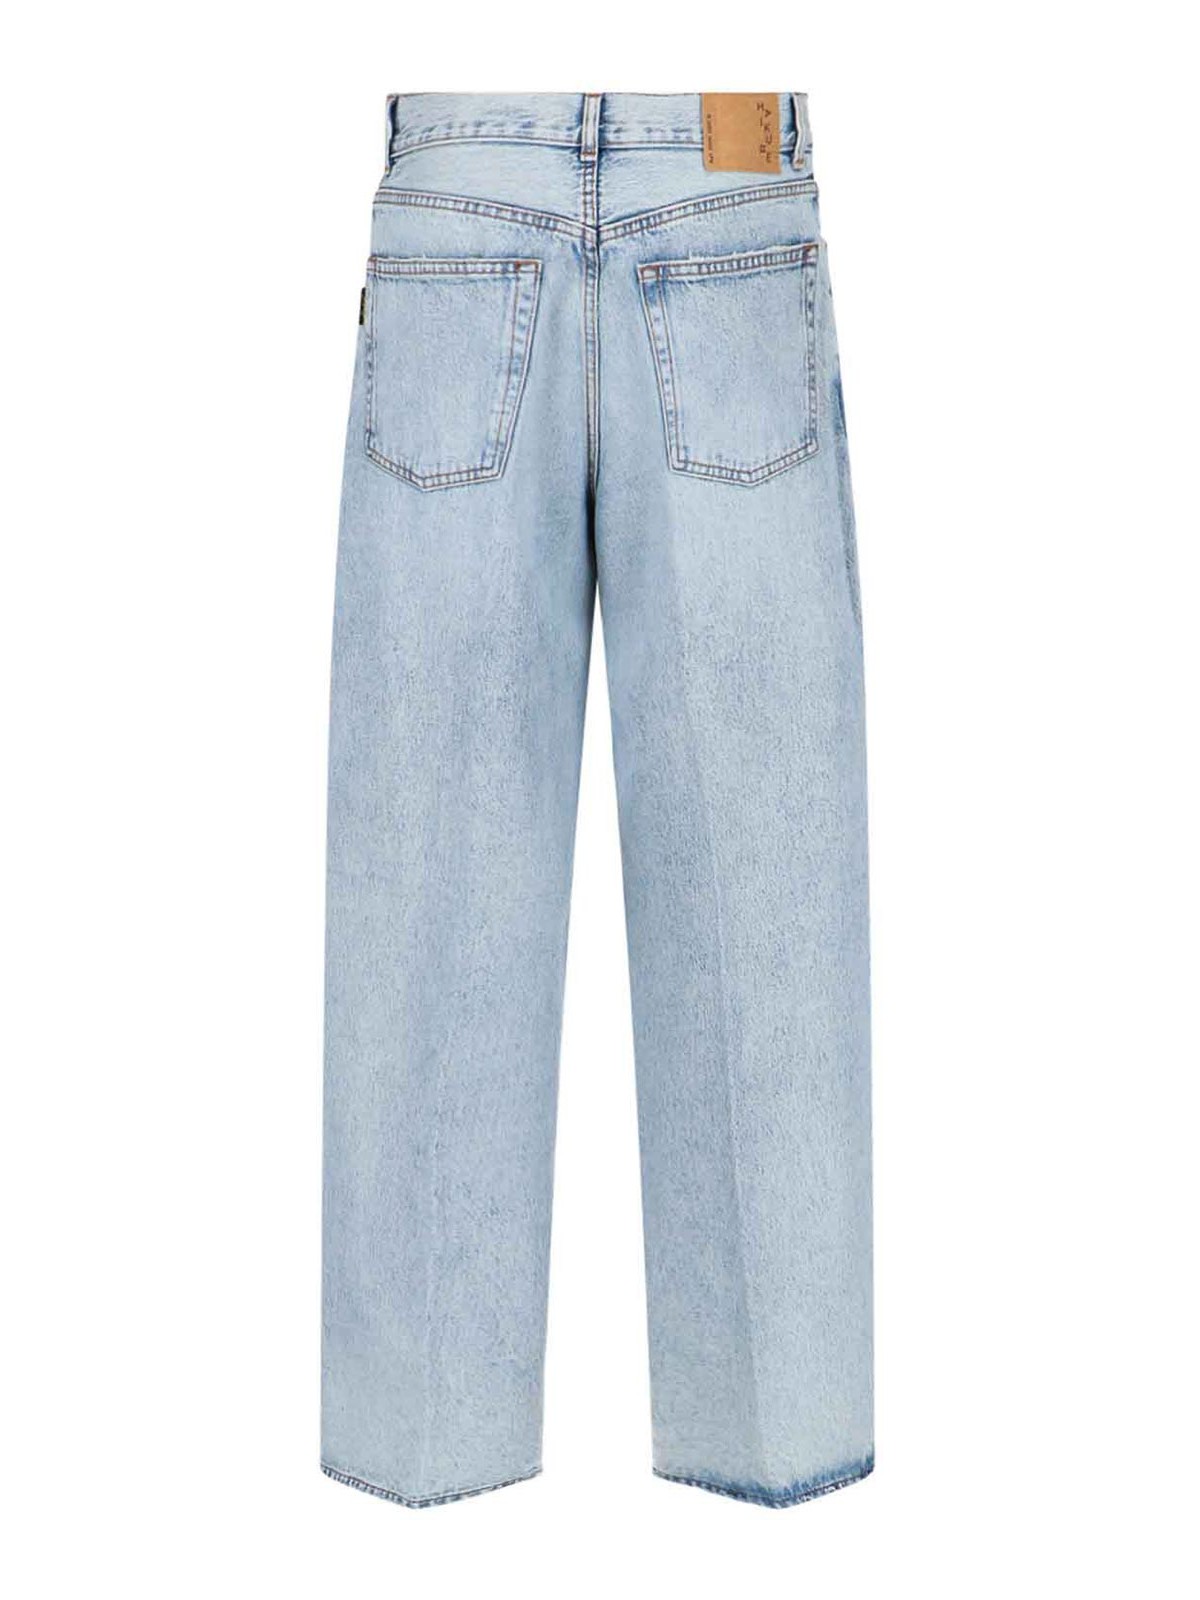 Shop Haikure Jeans At The Palace In Blue